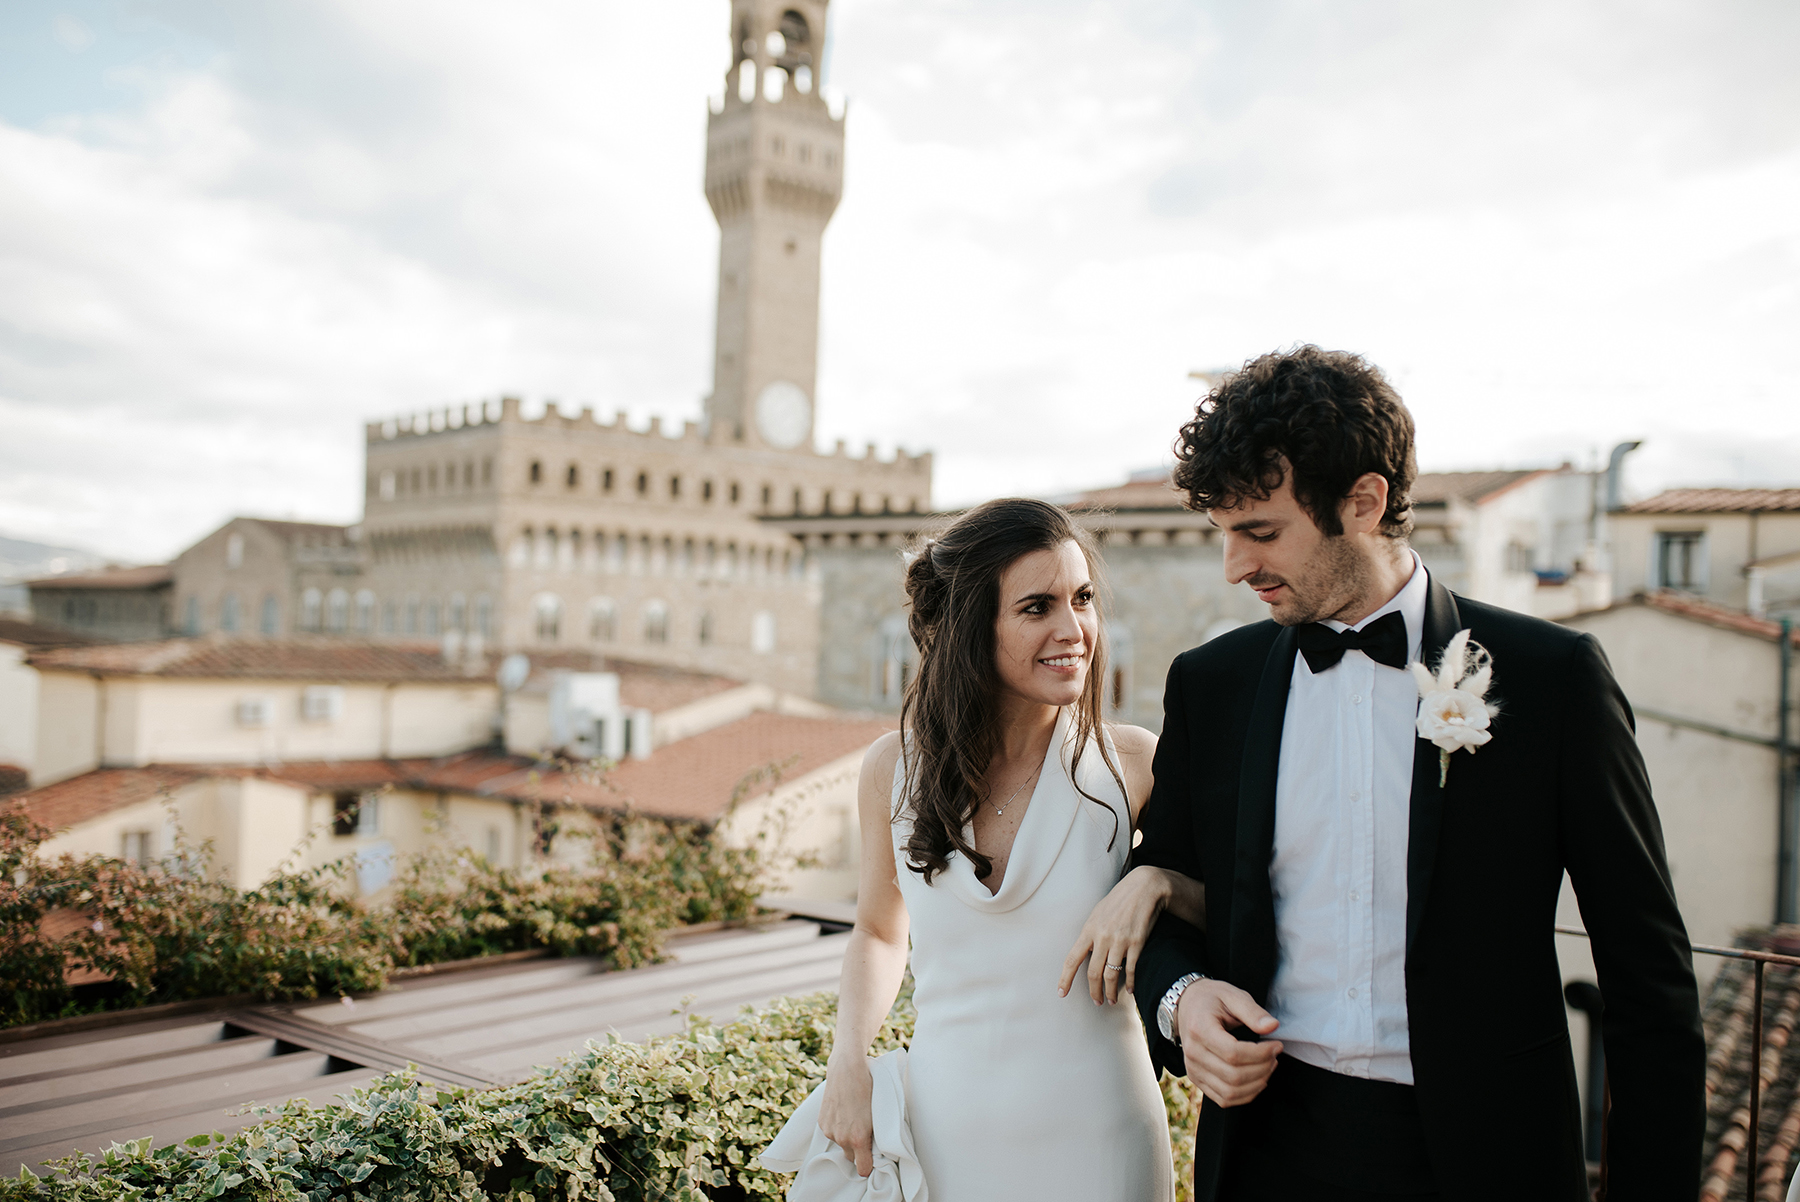 Elegant and Moody Elopement Inspiration in Florence Silvia Mazzei12